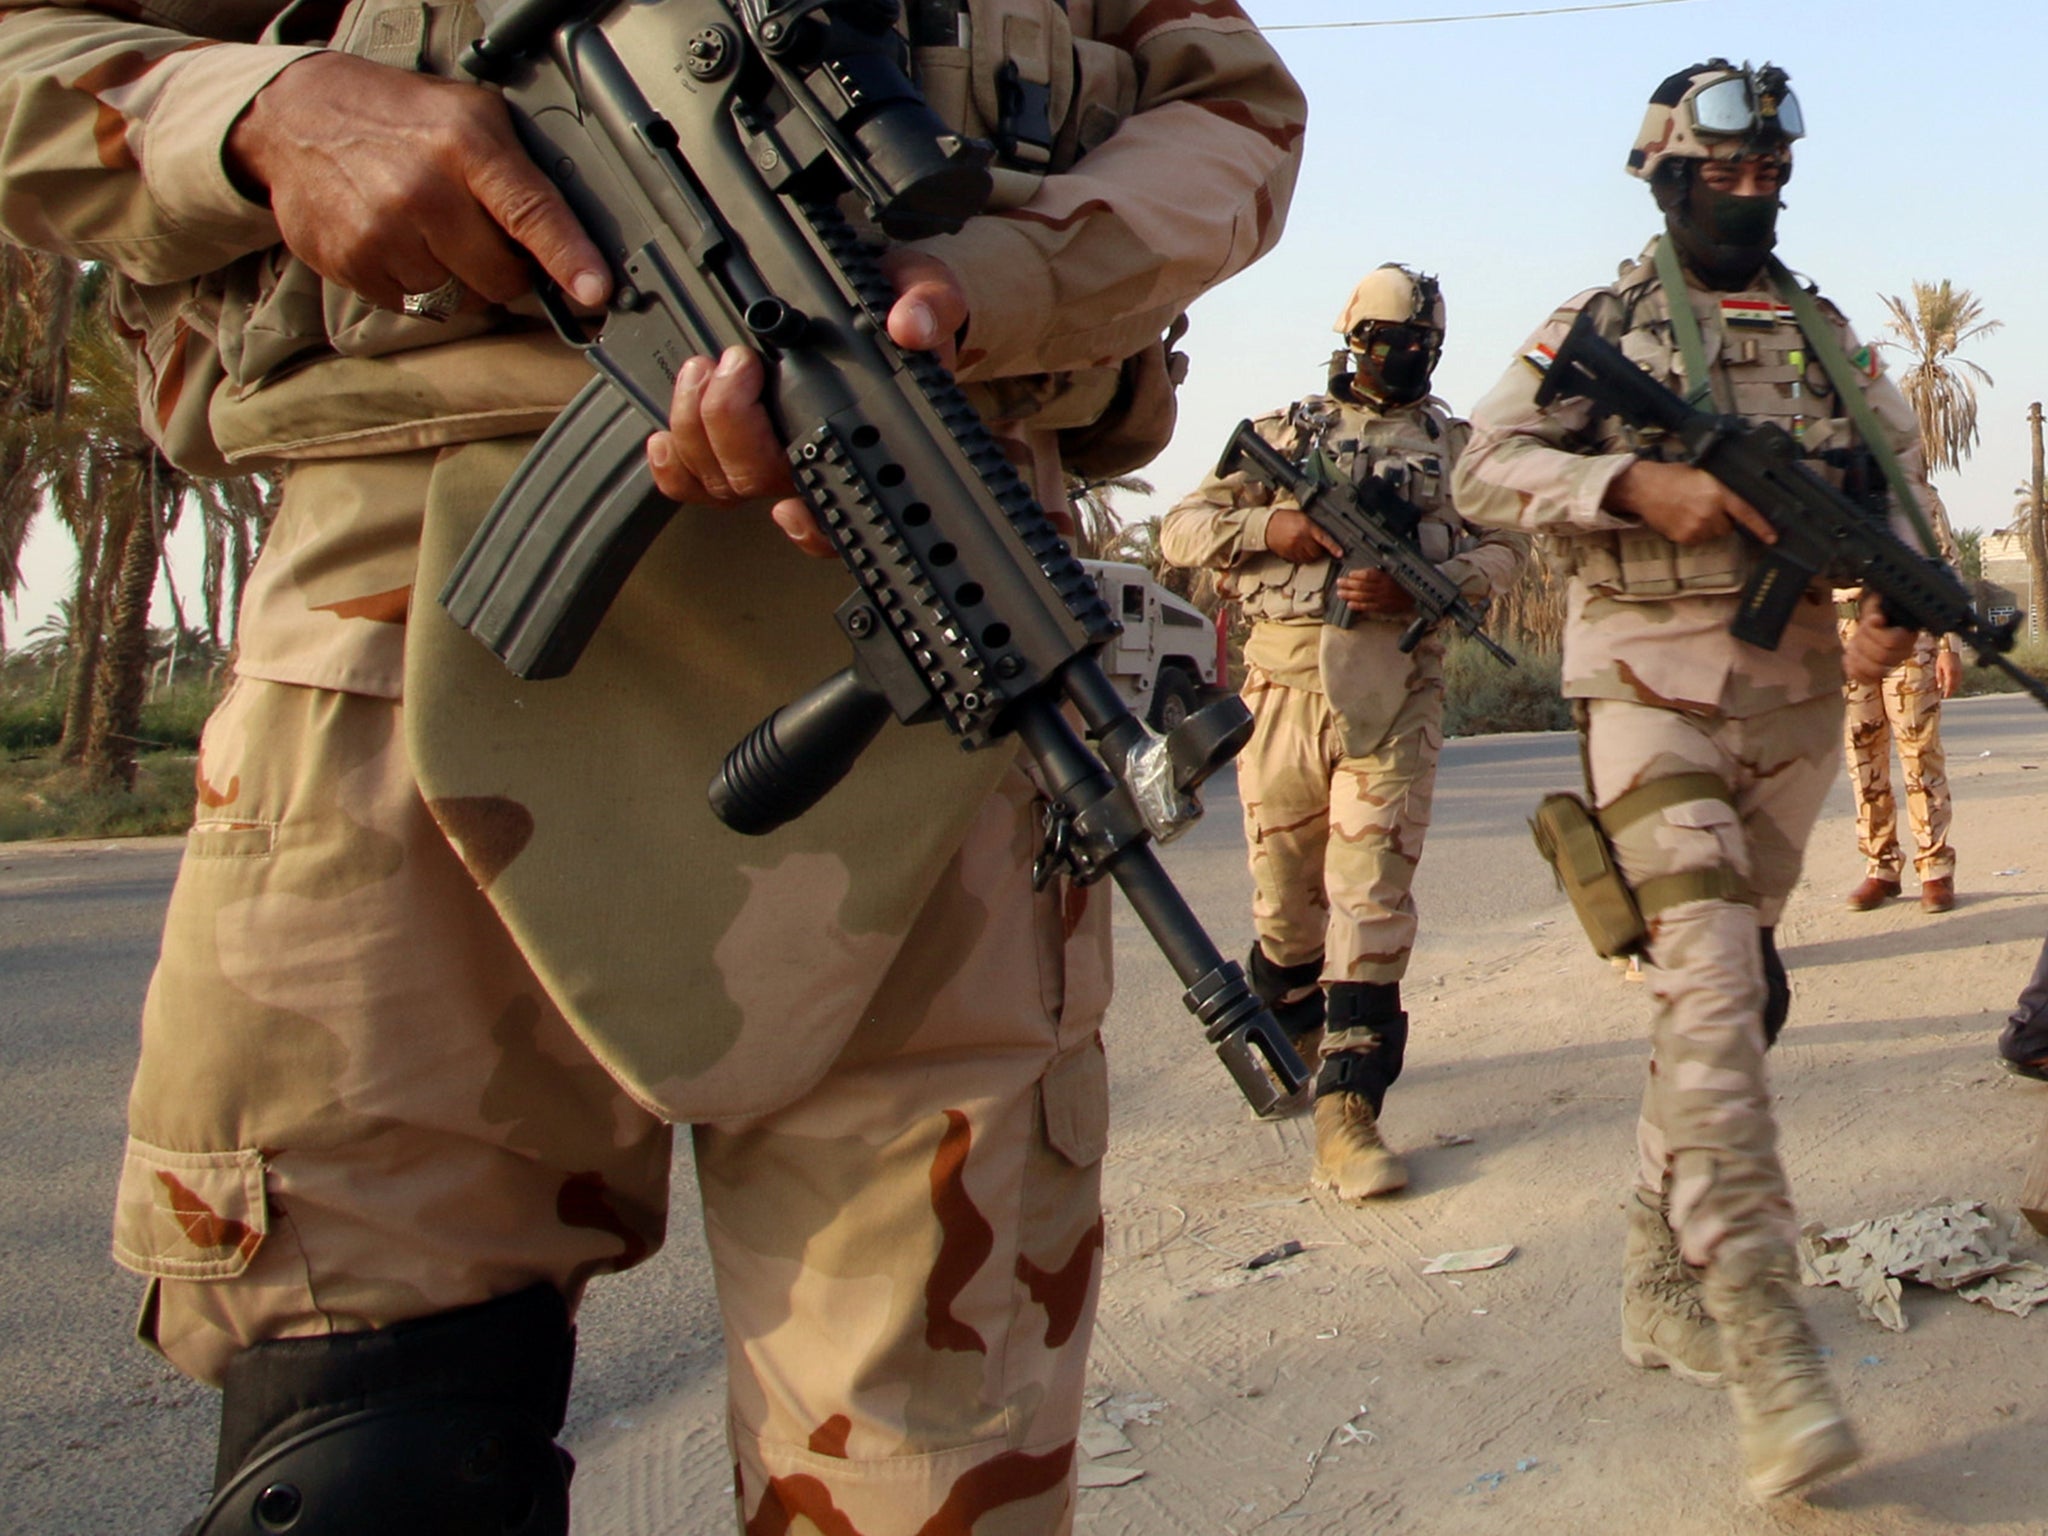 Iraqi army soldiers are seen in Al Karma, north of Basra, in this file photo